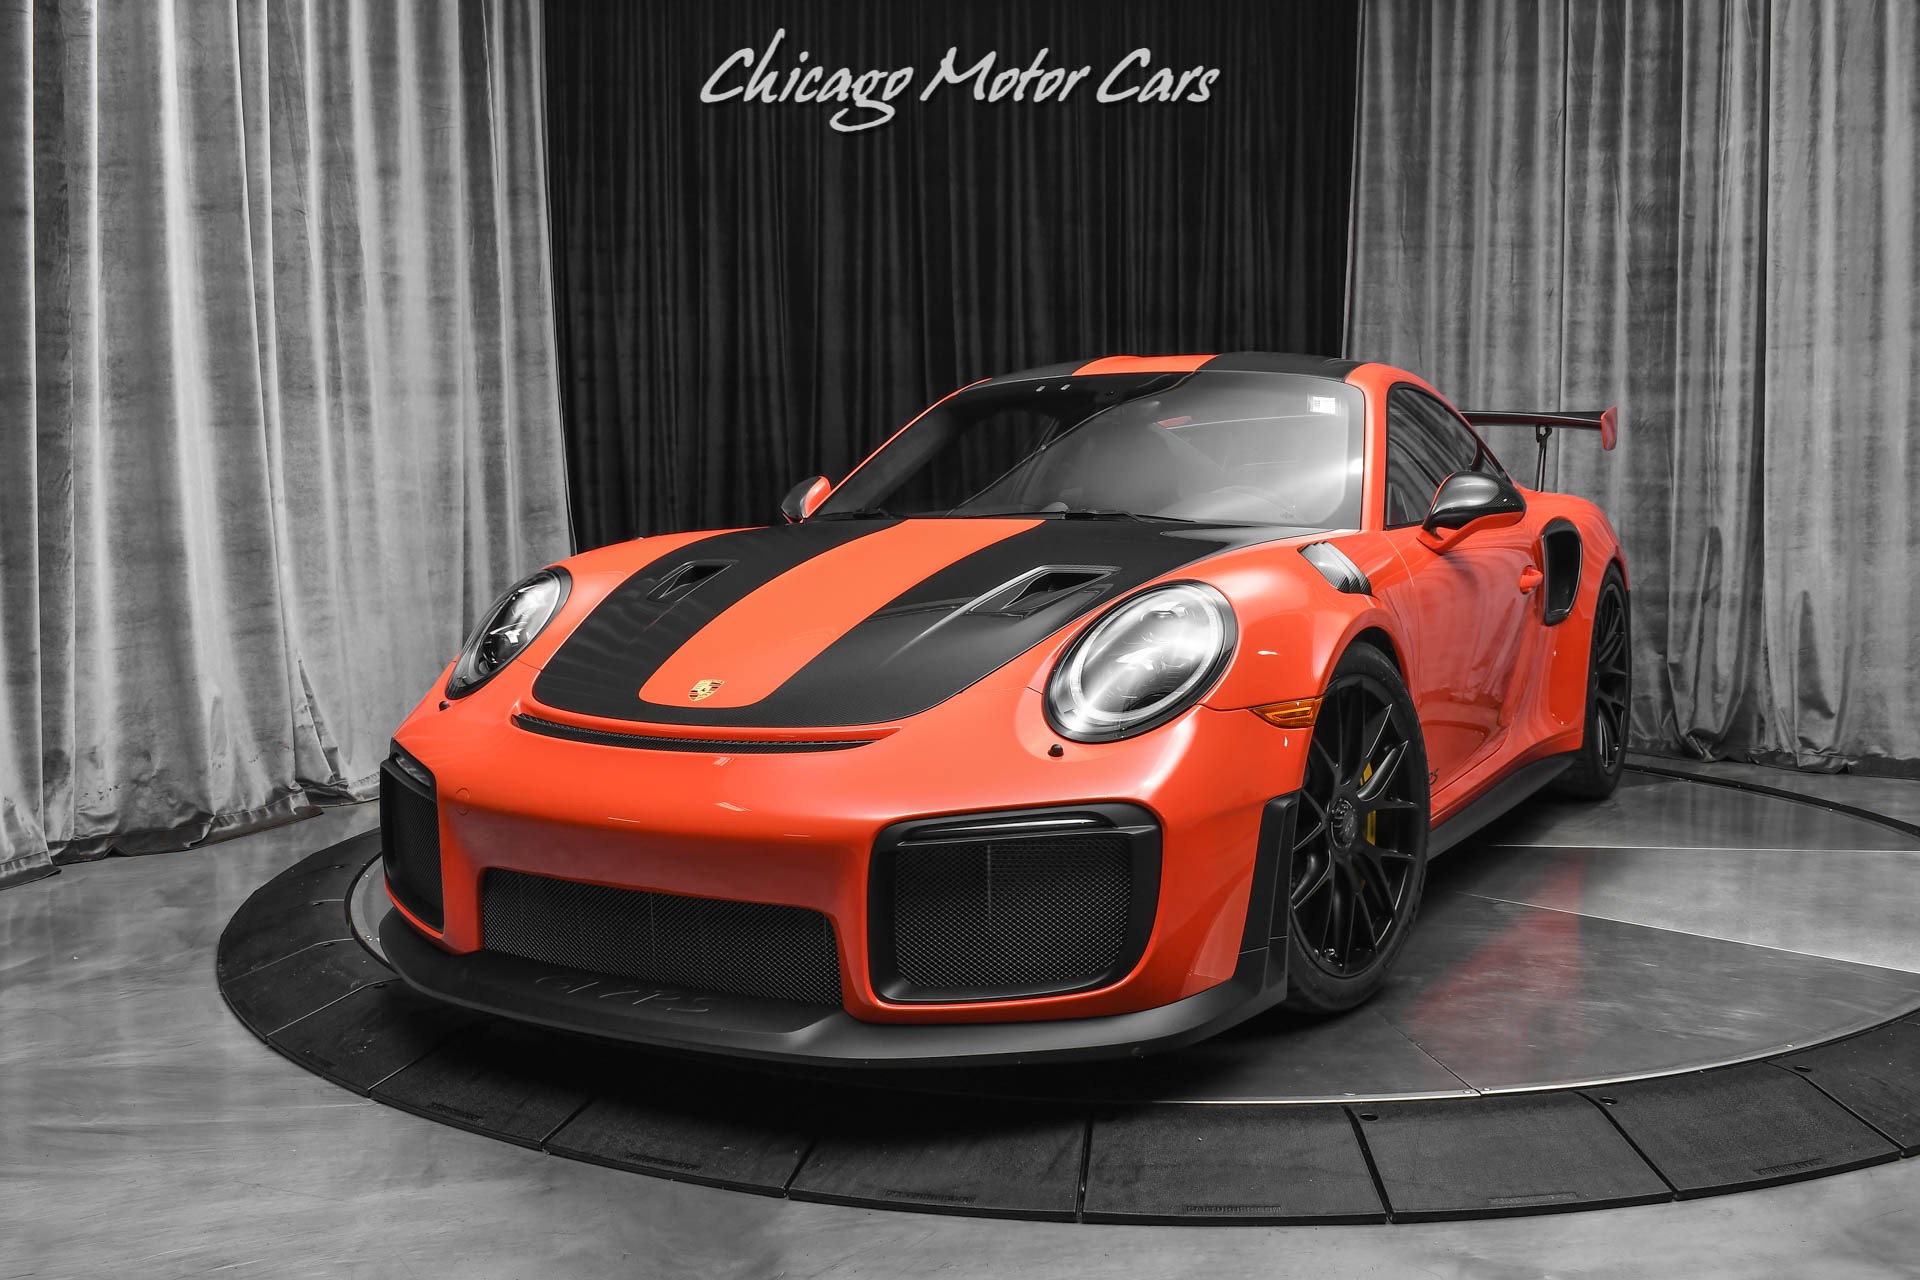 Used 2018 Porsche 911 GT2 RS Weissach Package Only 1500 Miles LOADED